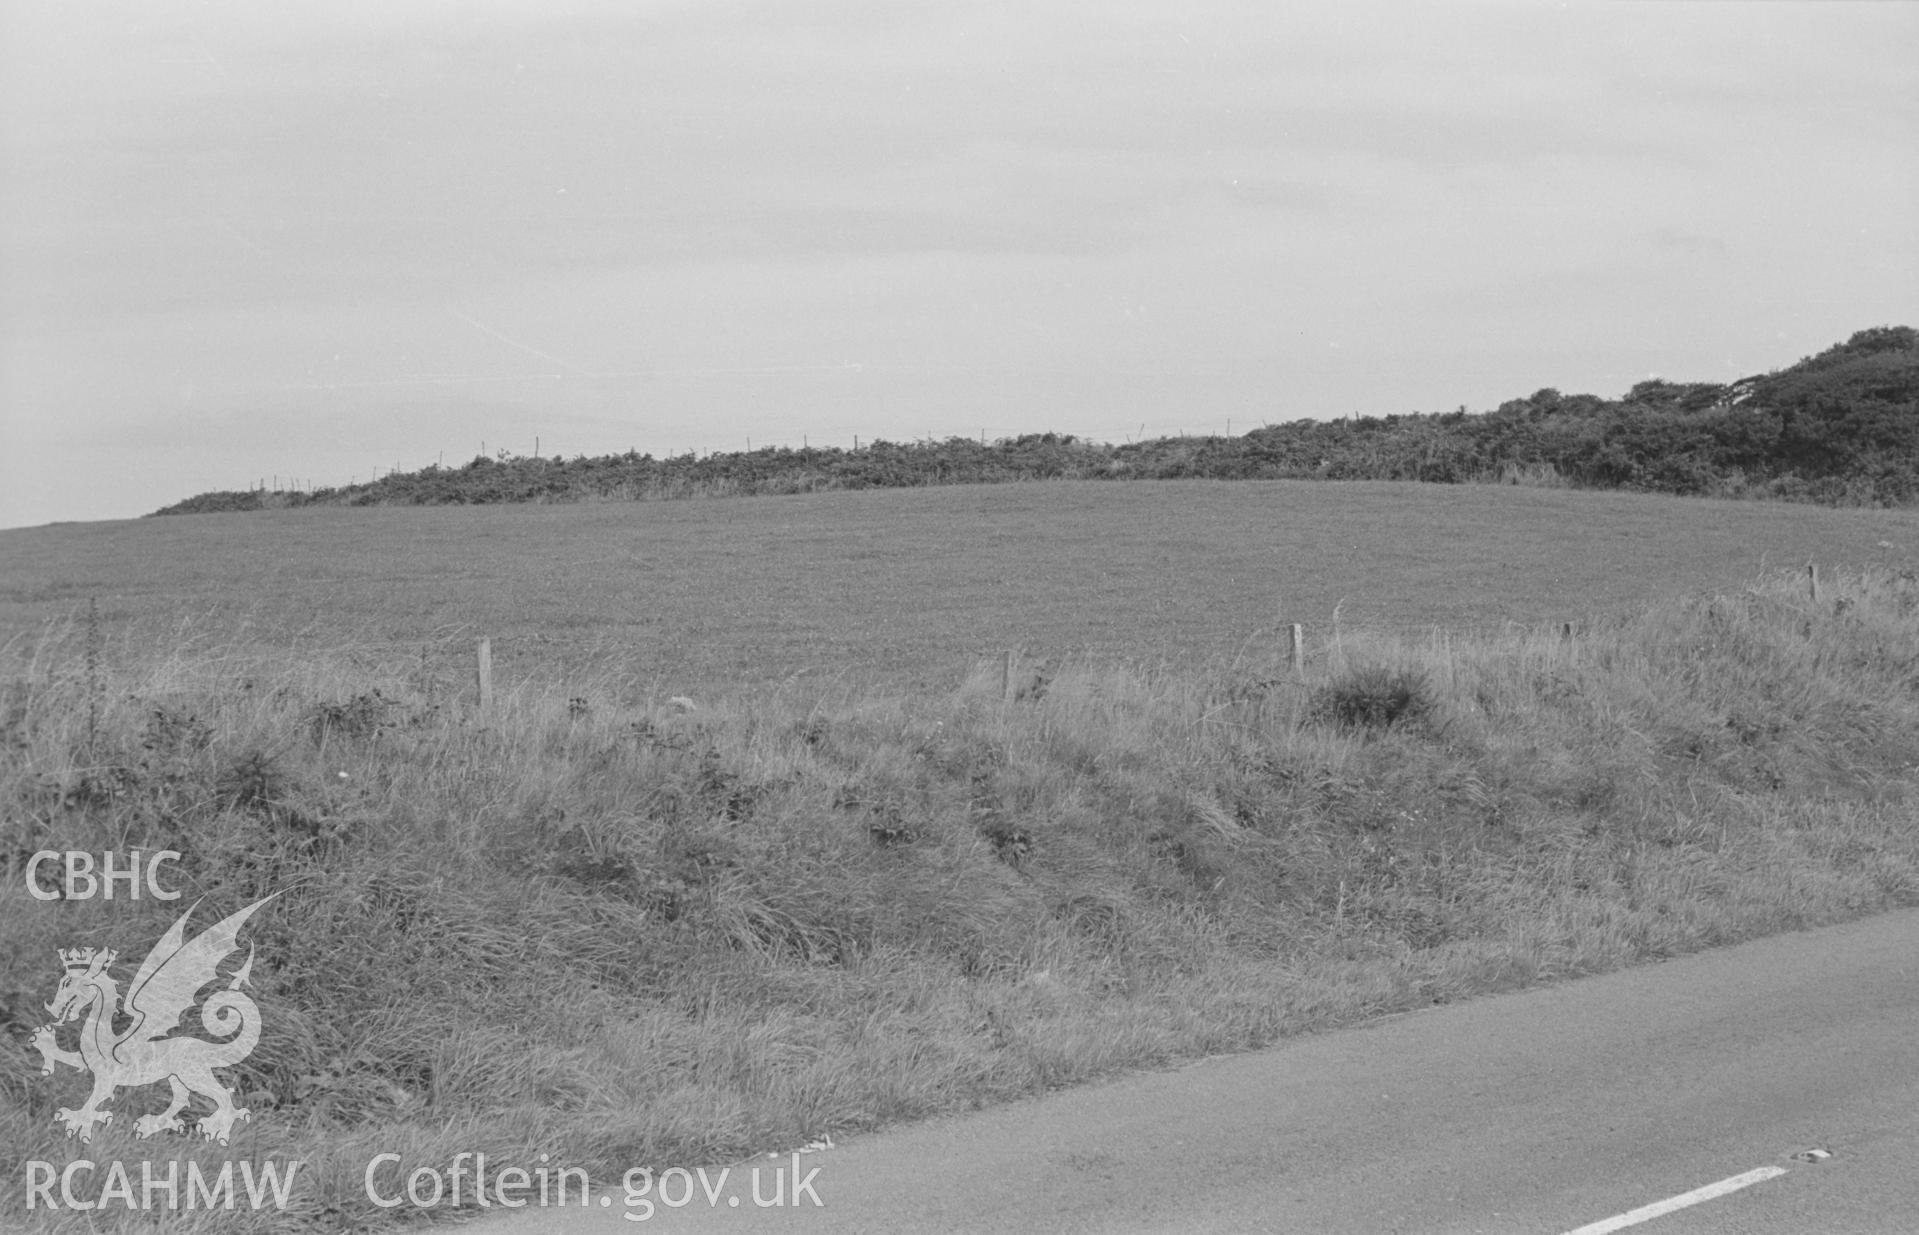 Digital copy of a black and white negative showing view of Castell Nadolig hillfort, Cardigan, with figure, car and haystack. Photographed in August 1963 by Arthur O. Chater from Grid Reference SN 2971 5025, looking north east.